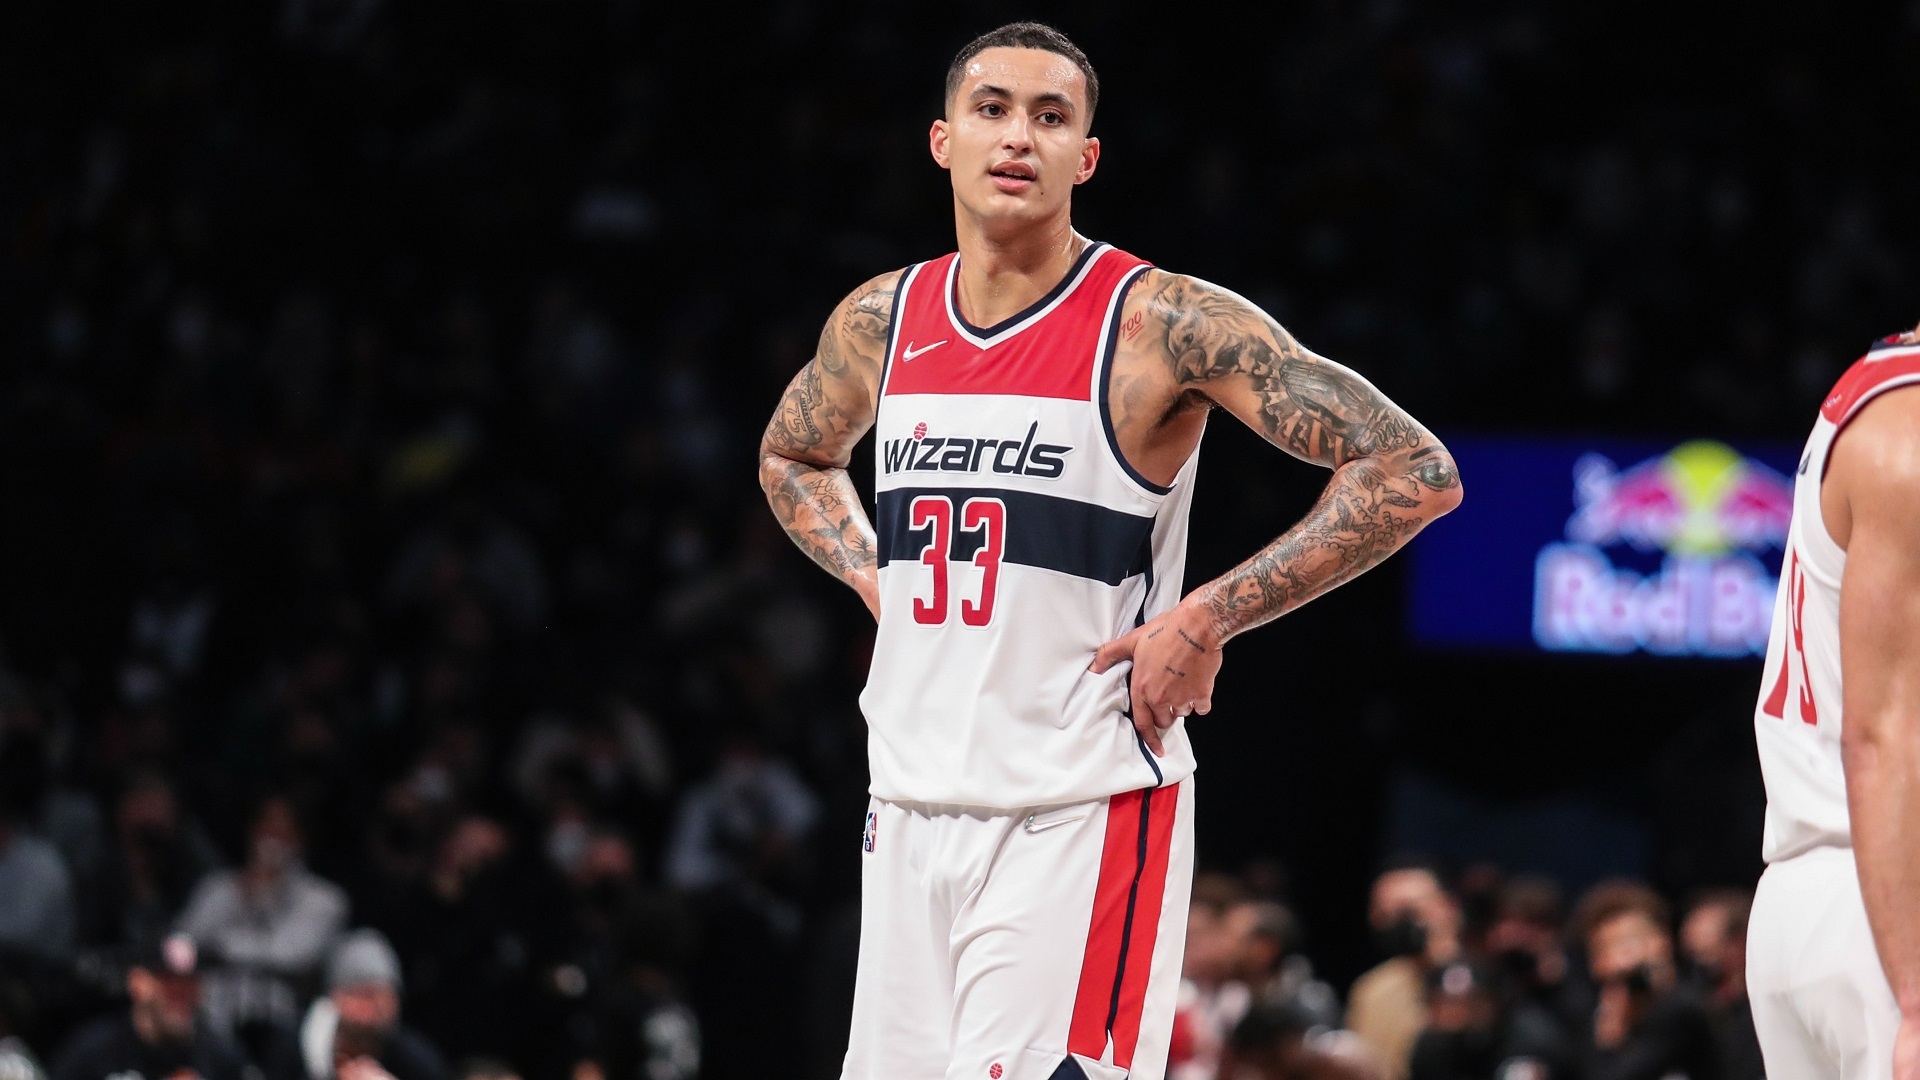 Wizards' Kyle Kuzma to throw out first pitch before Nats-Marlins game -  WTOP News